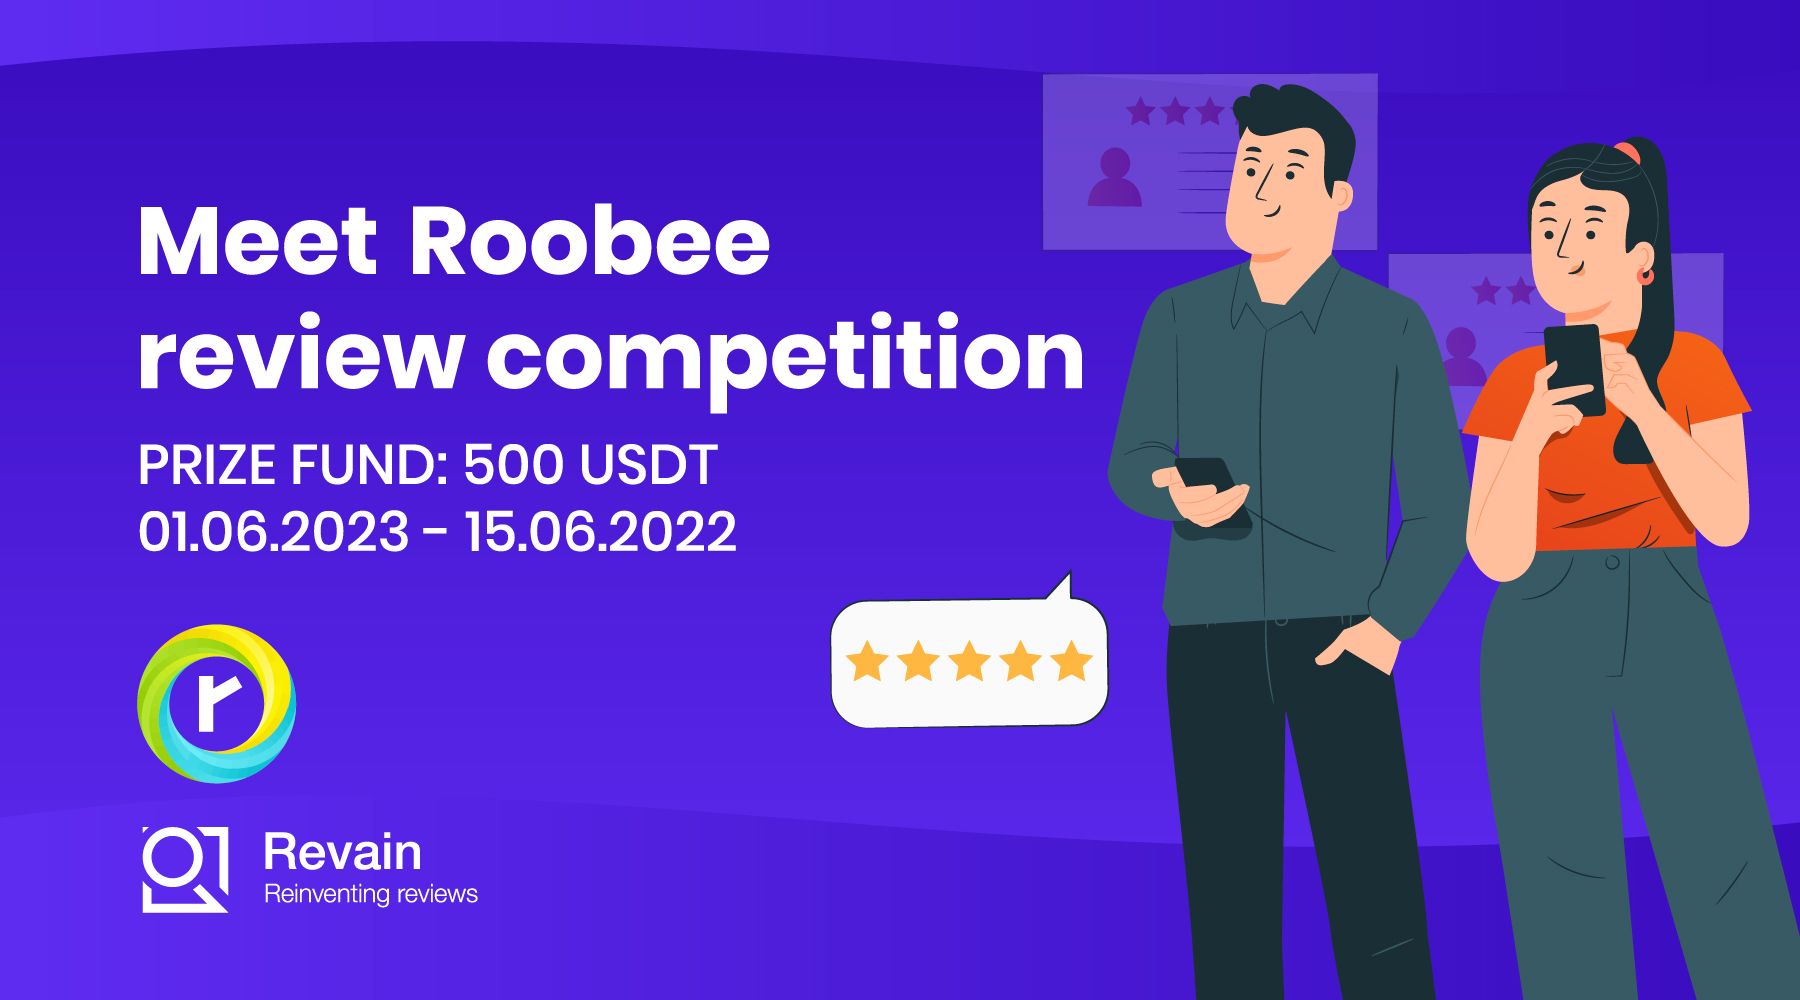 Meet Roobee review competition!